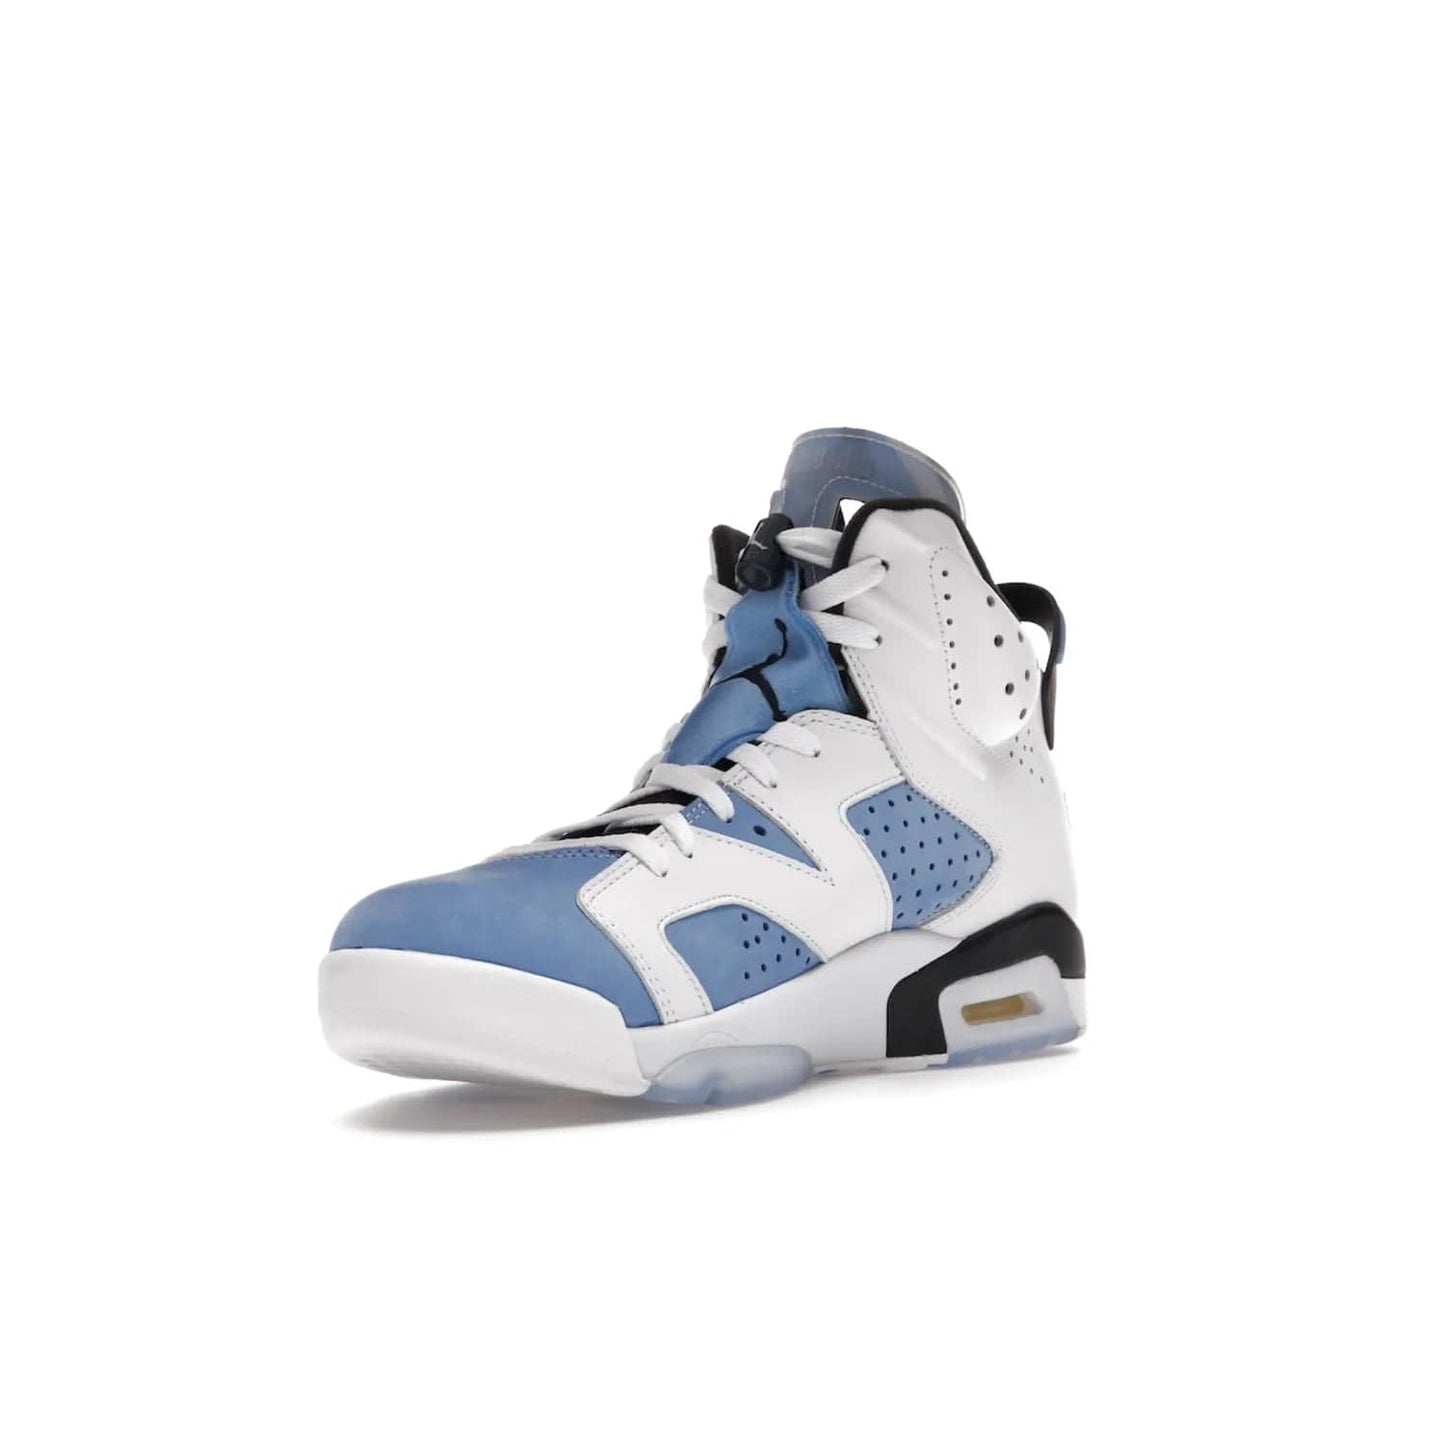 Jordan 6 Retro UNC White - Image 14 - Only at www.BallersClubKickz.com - Air Jordan 6 Retro UNC White with classic UNC colors brings nostalgia and style to a legendary silhouette. Celebrate MJ's alma mater with navy blue accents, icy semi-translucent sole and Jordan Team patch. Out March 2022 for the Sneaker Enthusiast.